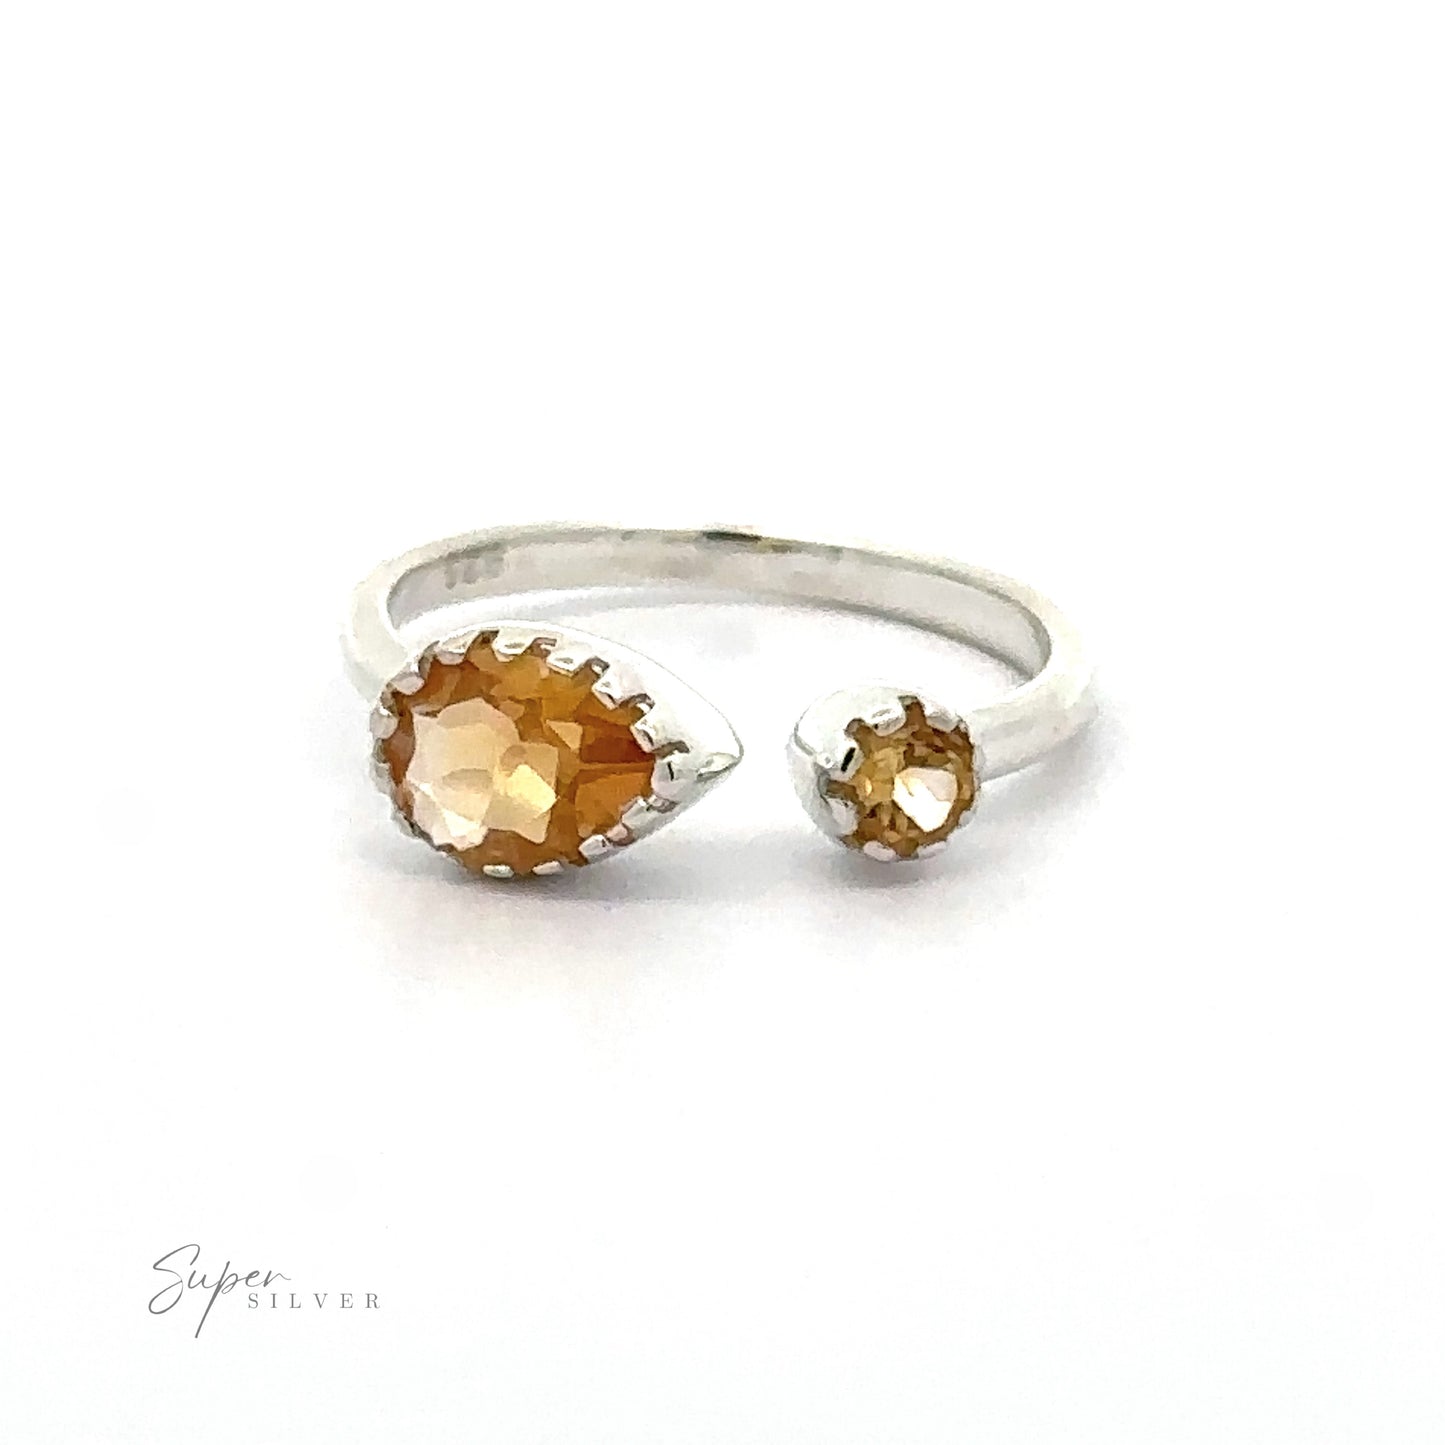 
                  
                    Adjustable Dainty Adjustable Gemstone Ring with Two Stones featuring a large teardrop-shaped amber gem and a smaller round amber accent on a white background.
                  
                